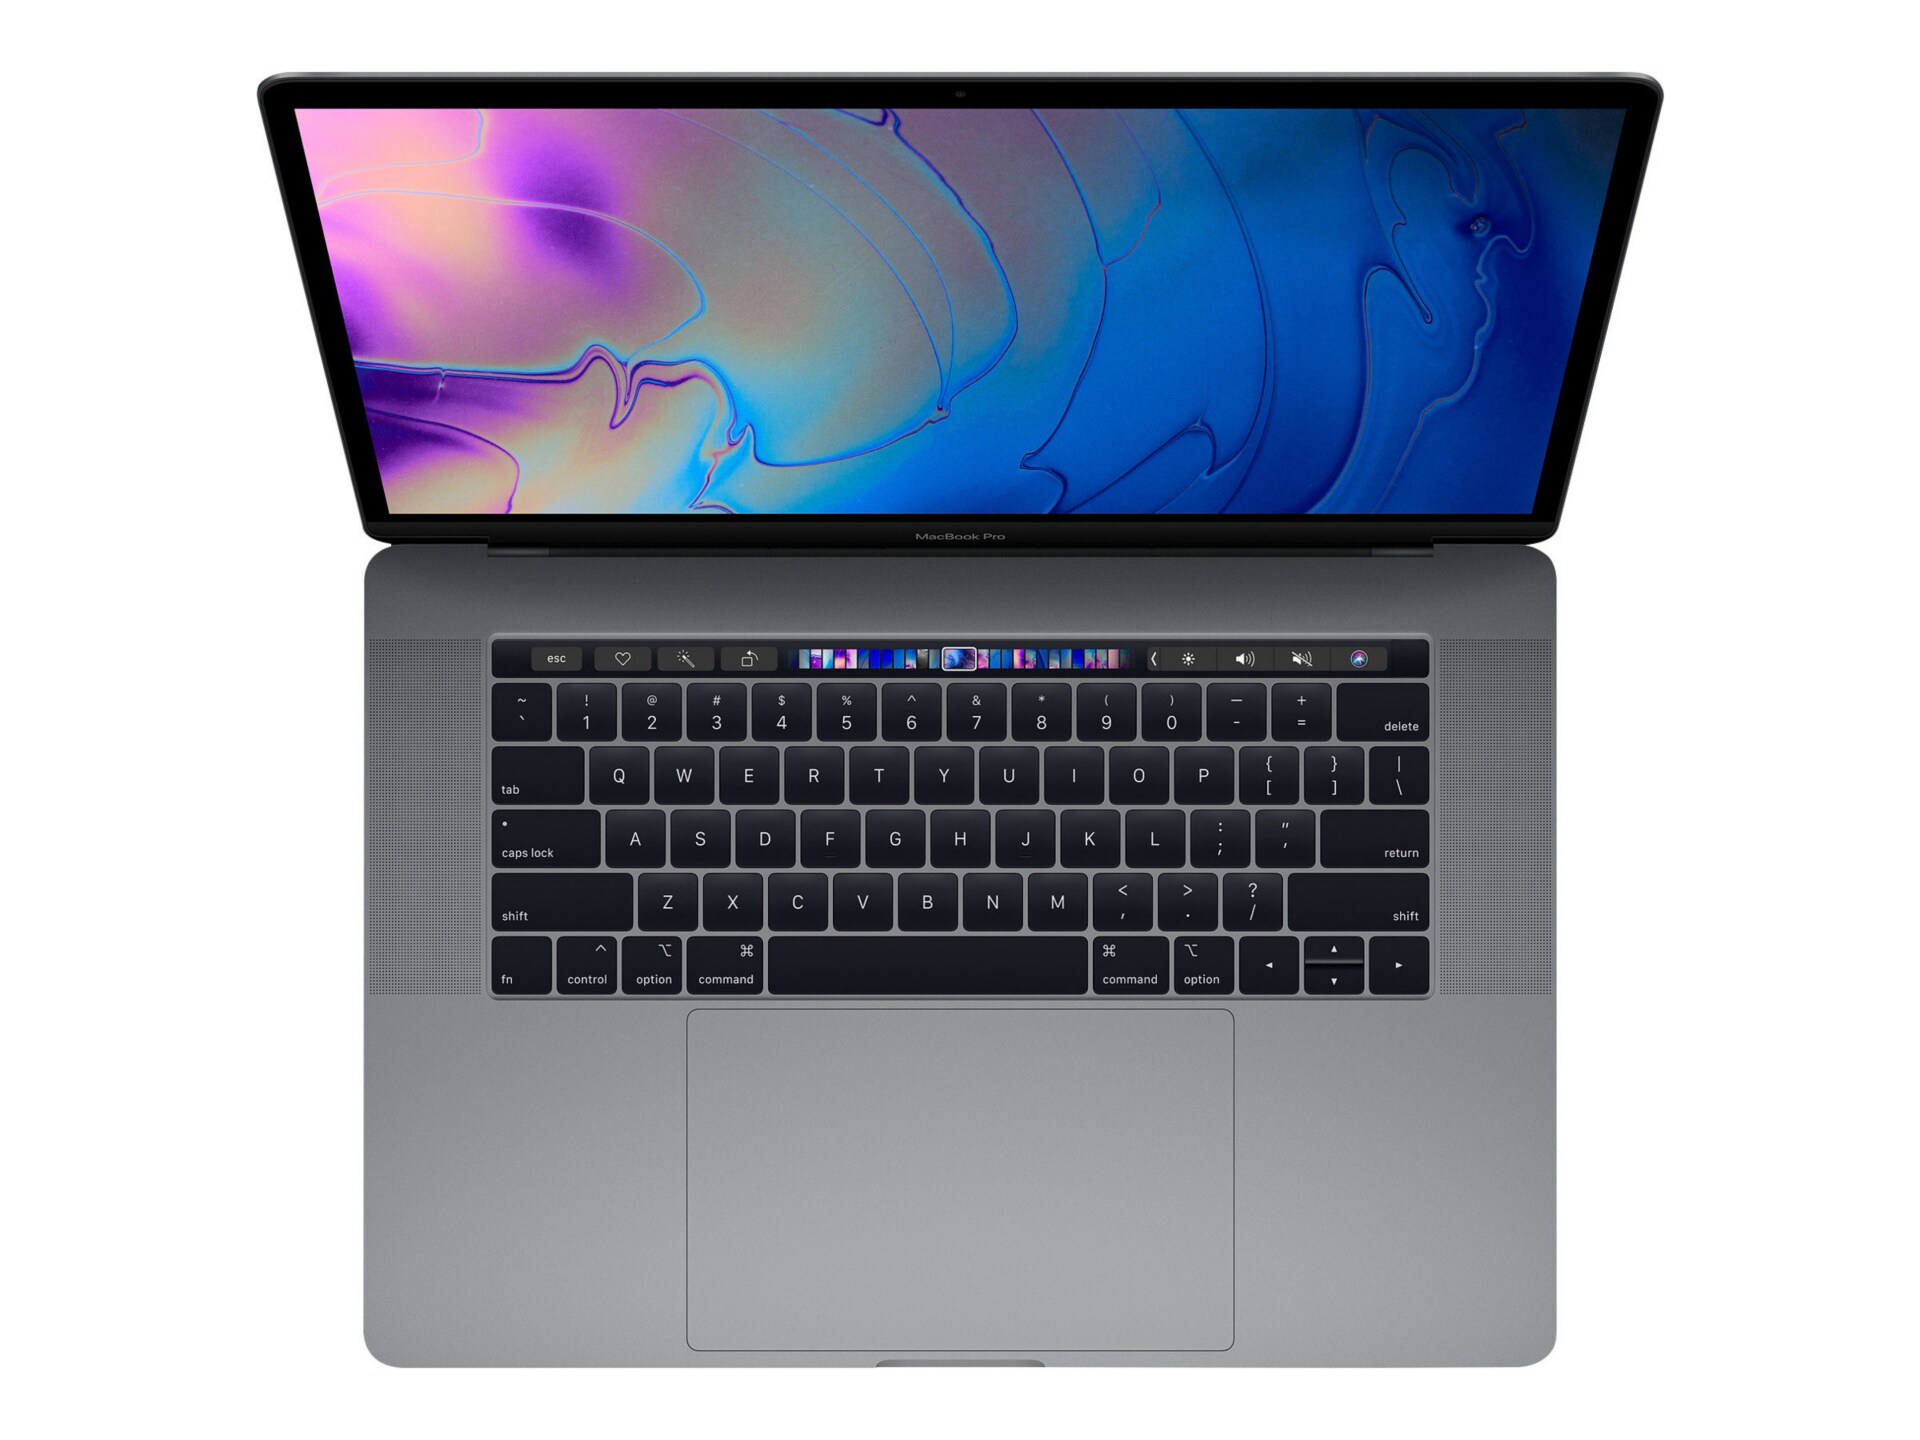 Apple MacBook Pro with Touch Bar - 15.4" - Core i7 - 16 GB RAM - 512 GB SSD - English